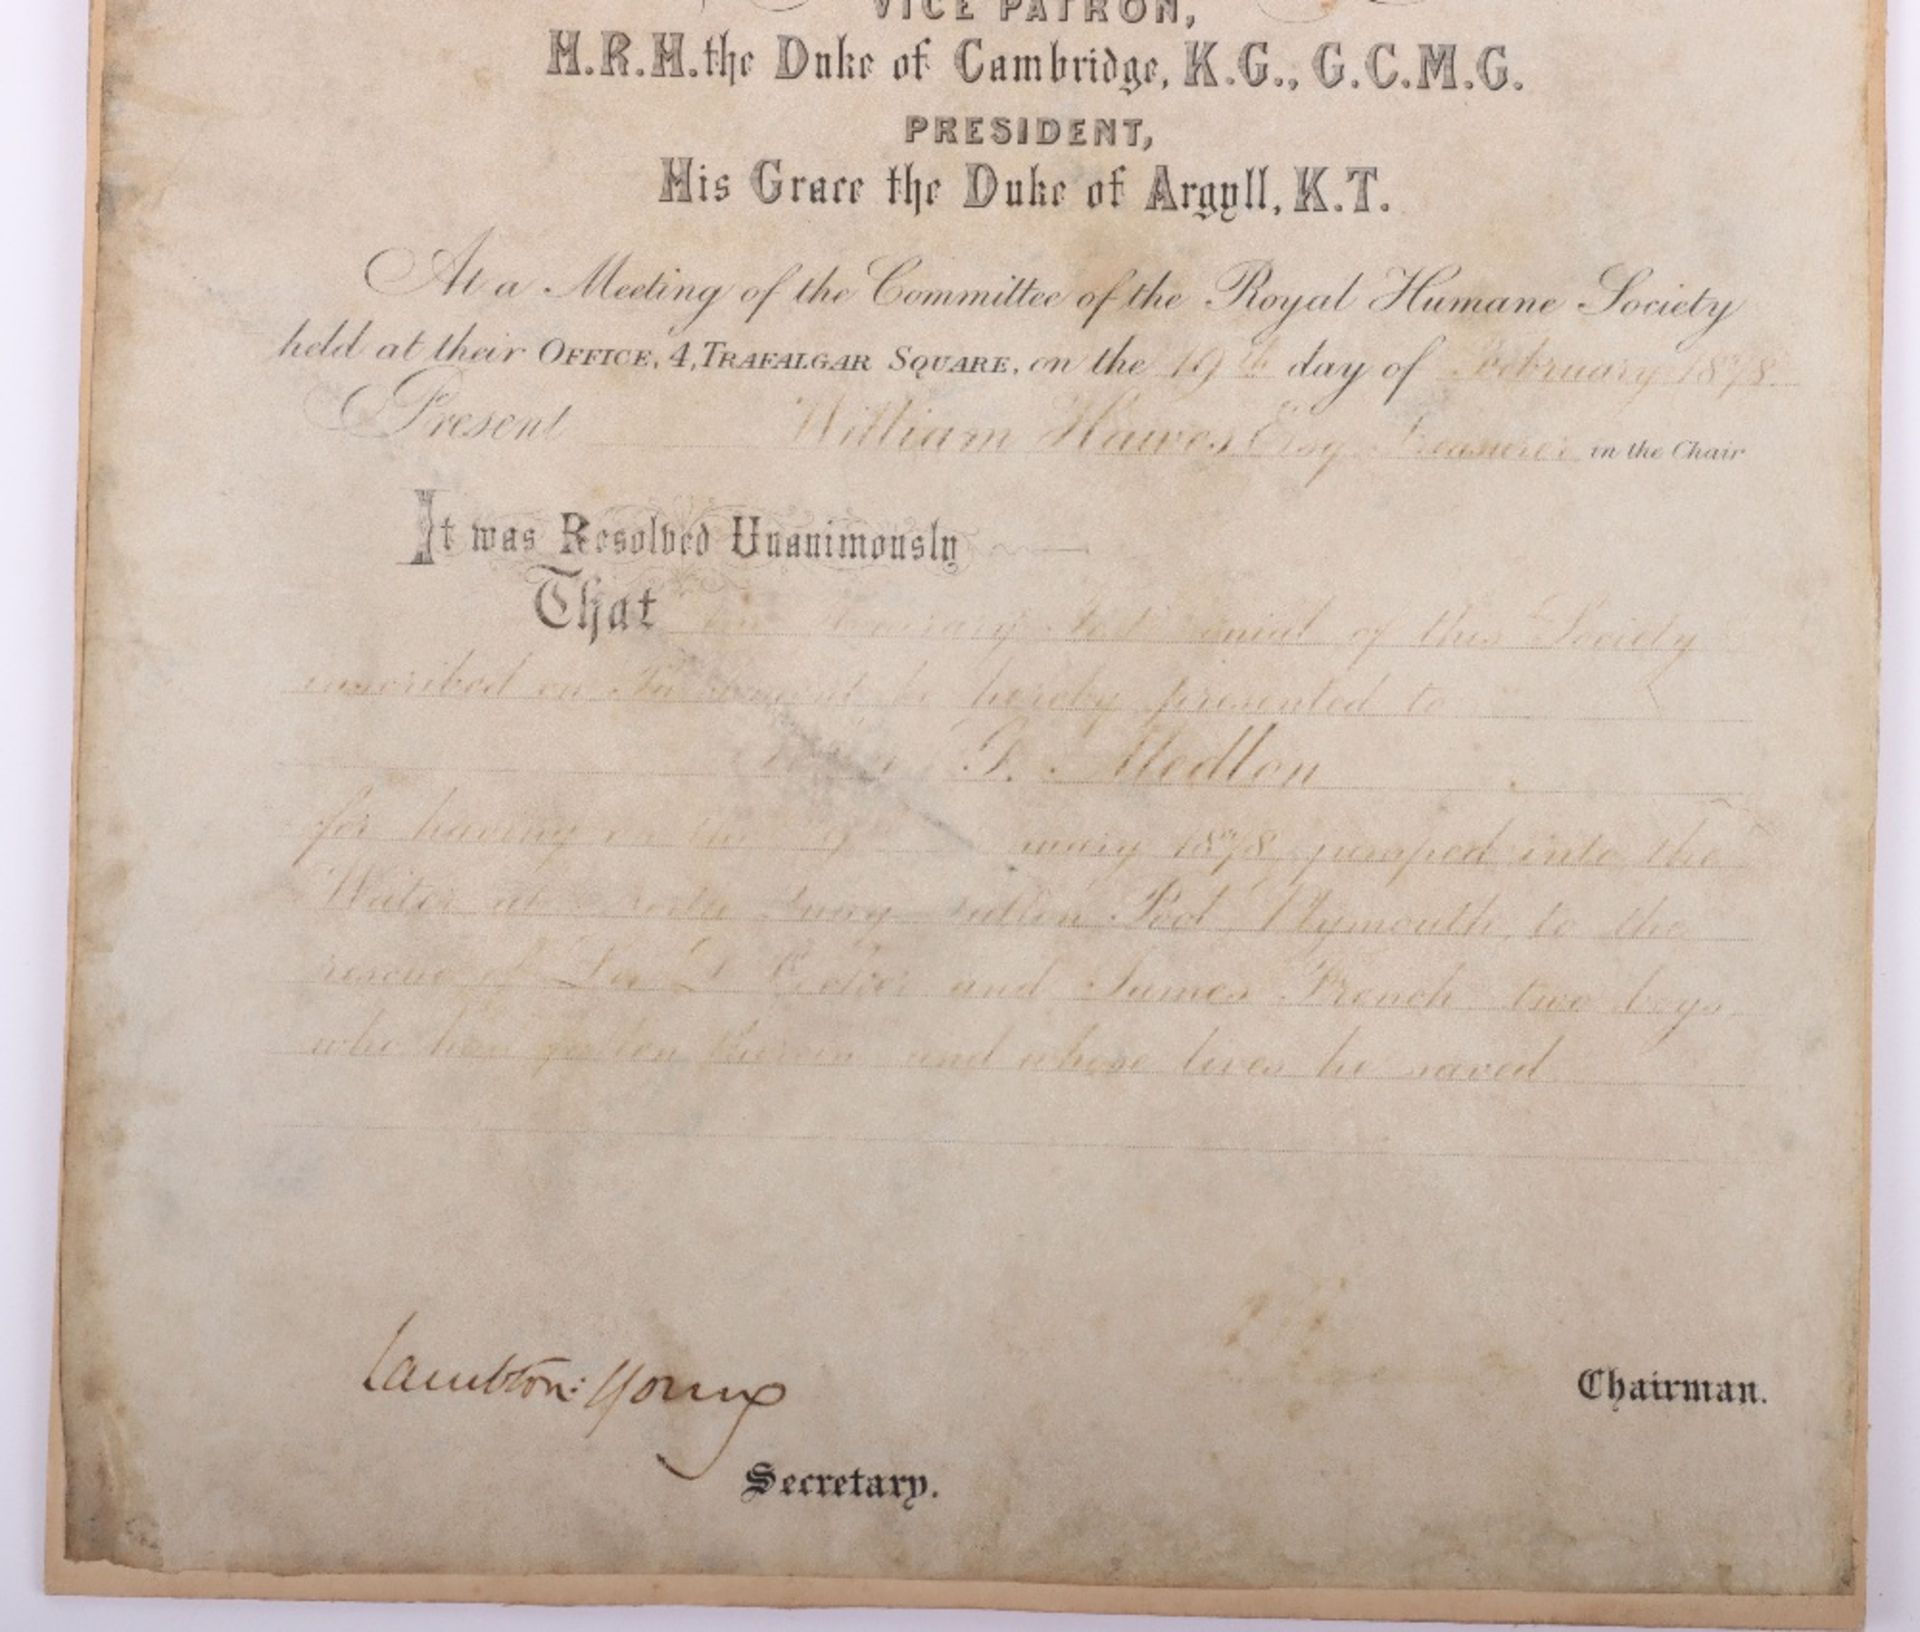 Original Royal Humane Society Mounted Presentation Parchment Certificate - Image 4 of 4